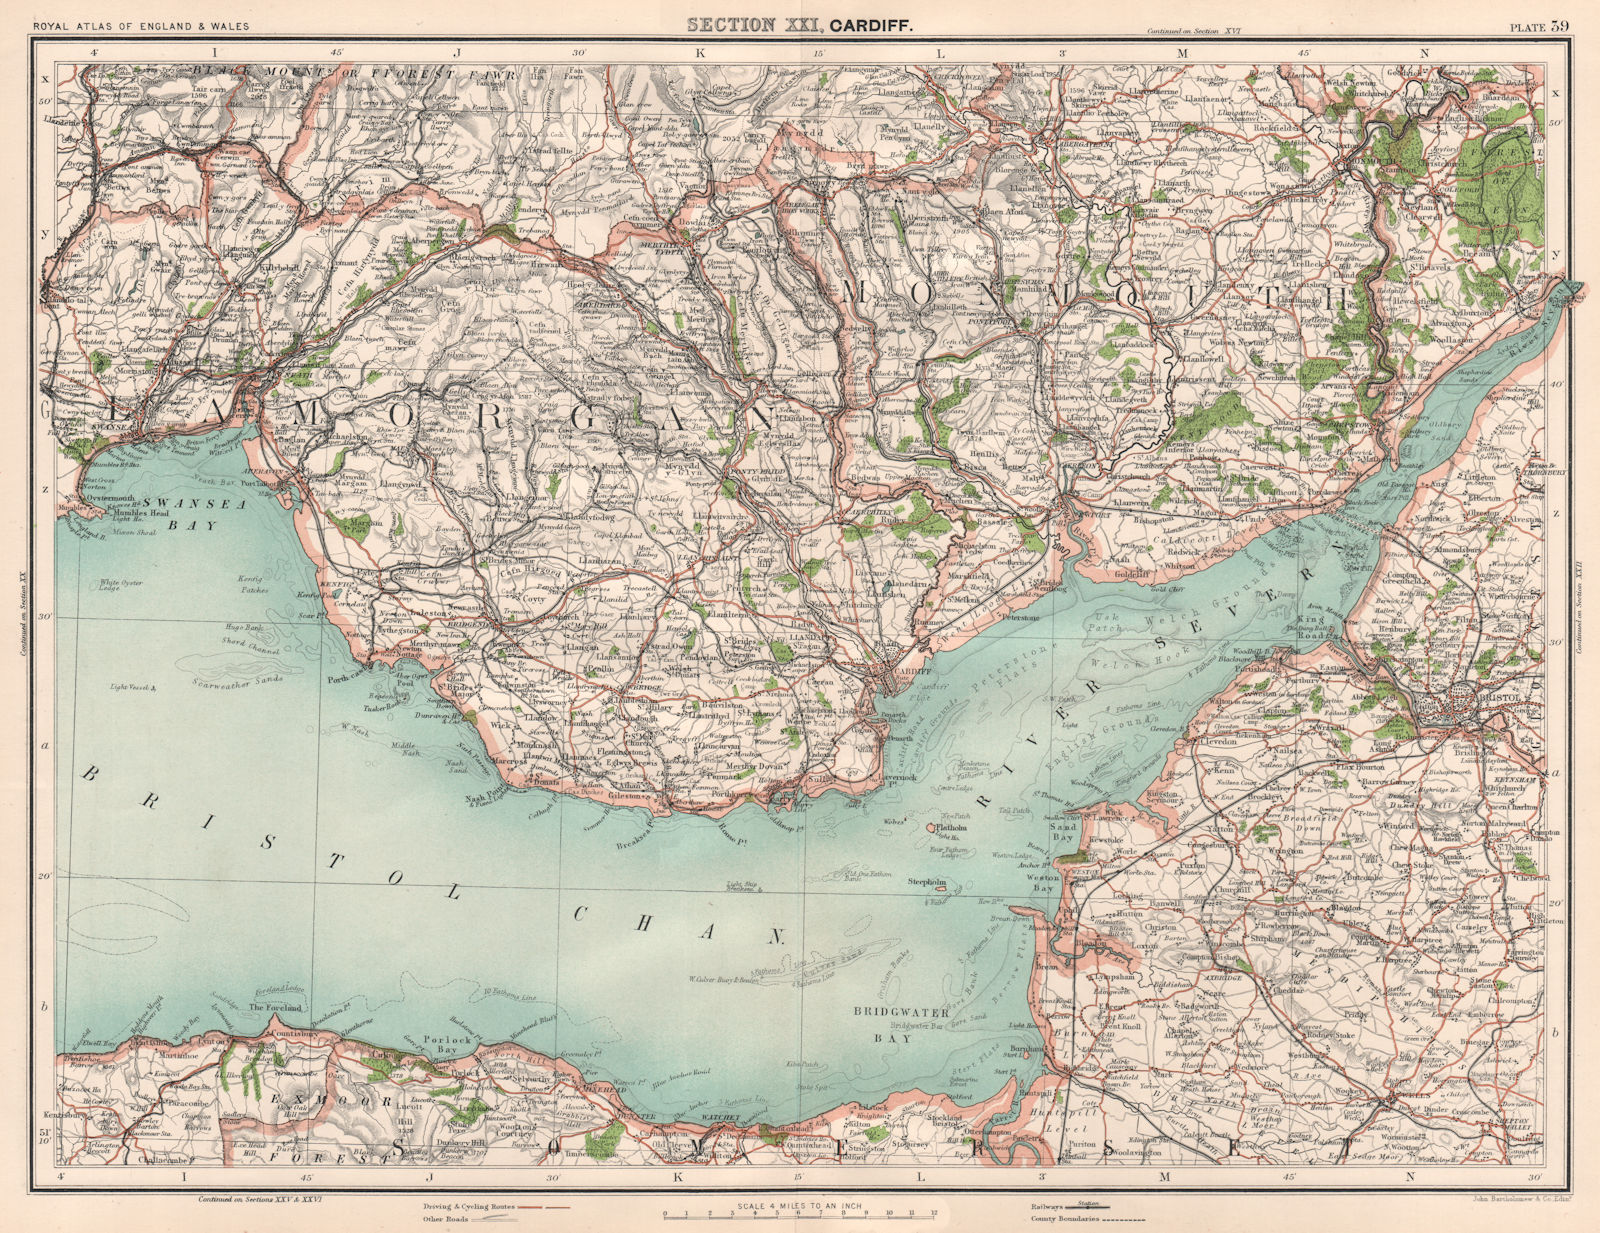 Associate Product SEVERN ESTUARY / BRISTOL CHANNEL. South Wales valleys. Somerset coast 1898 map